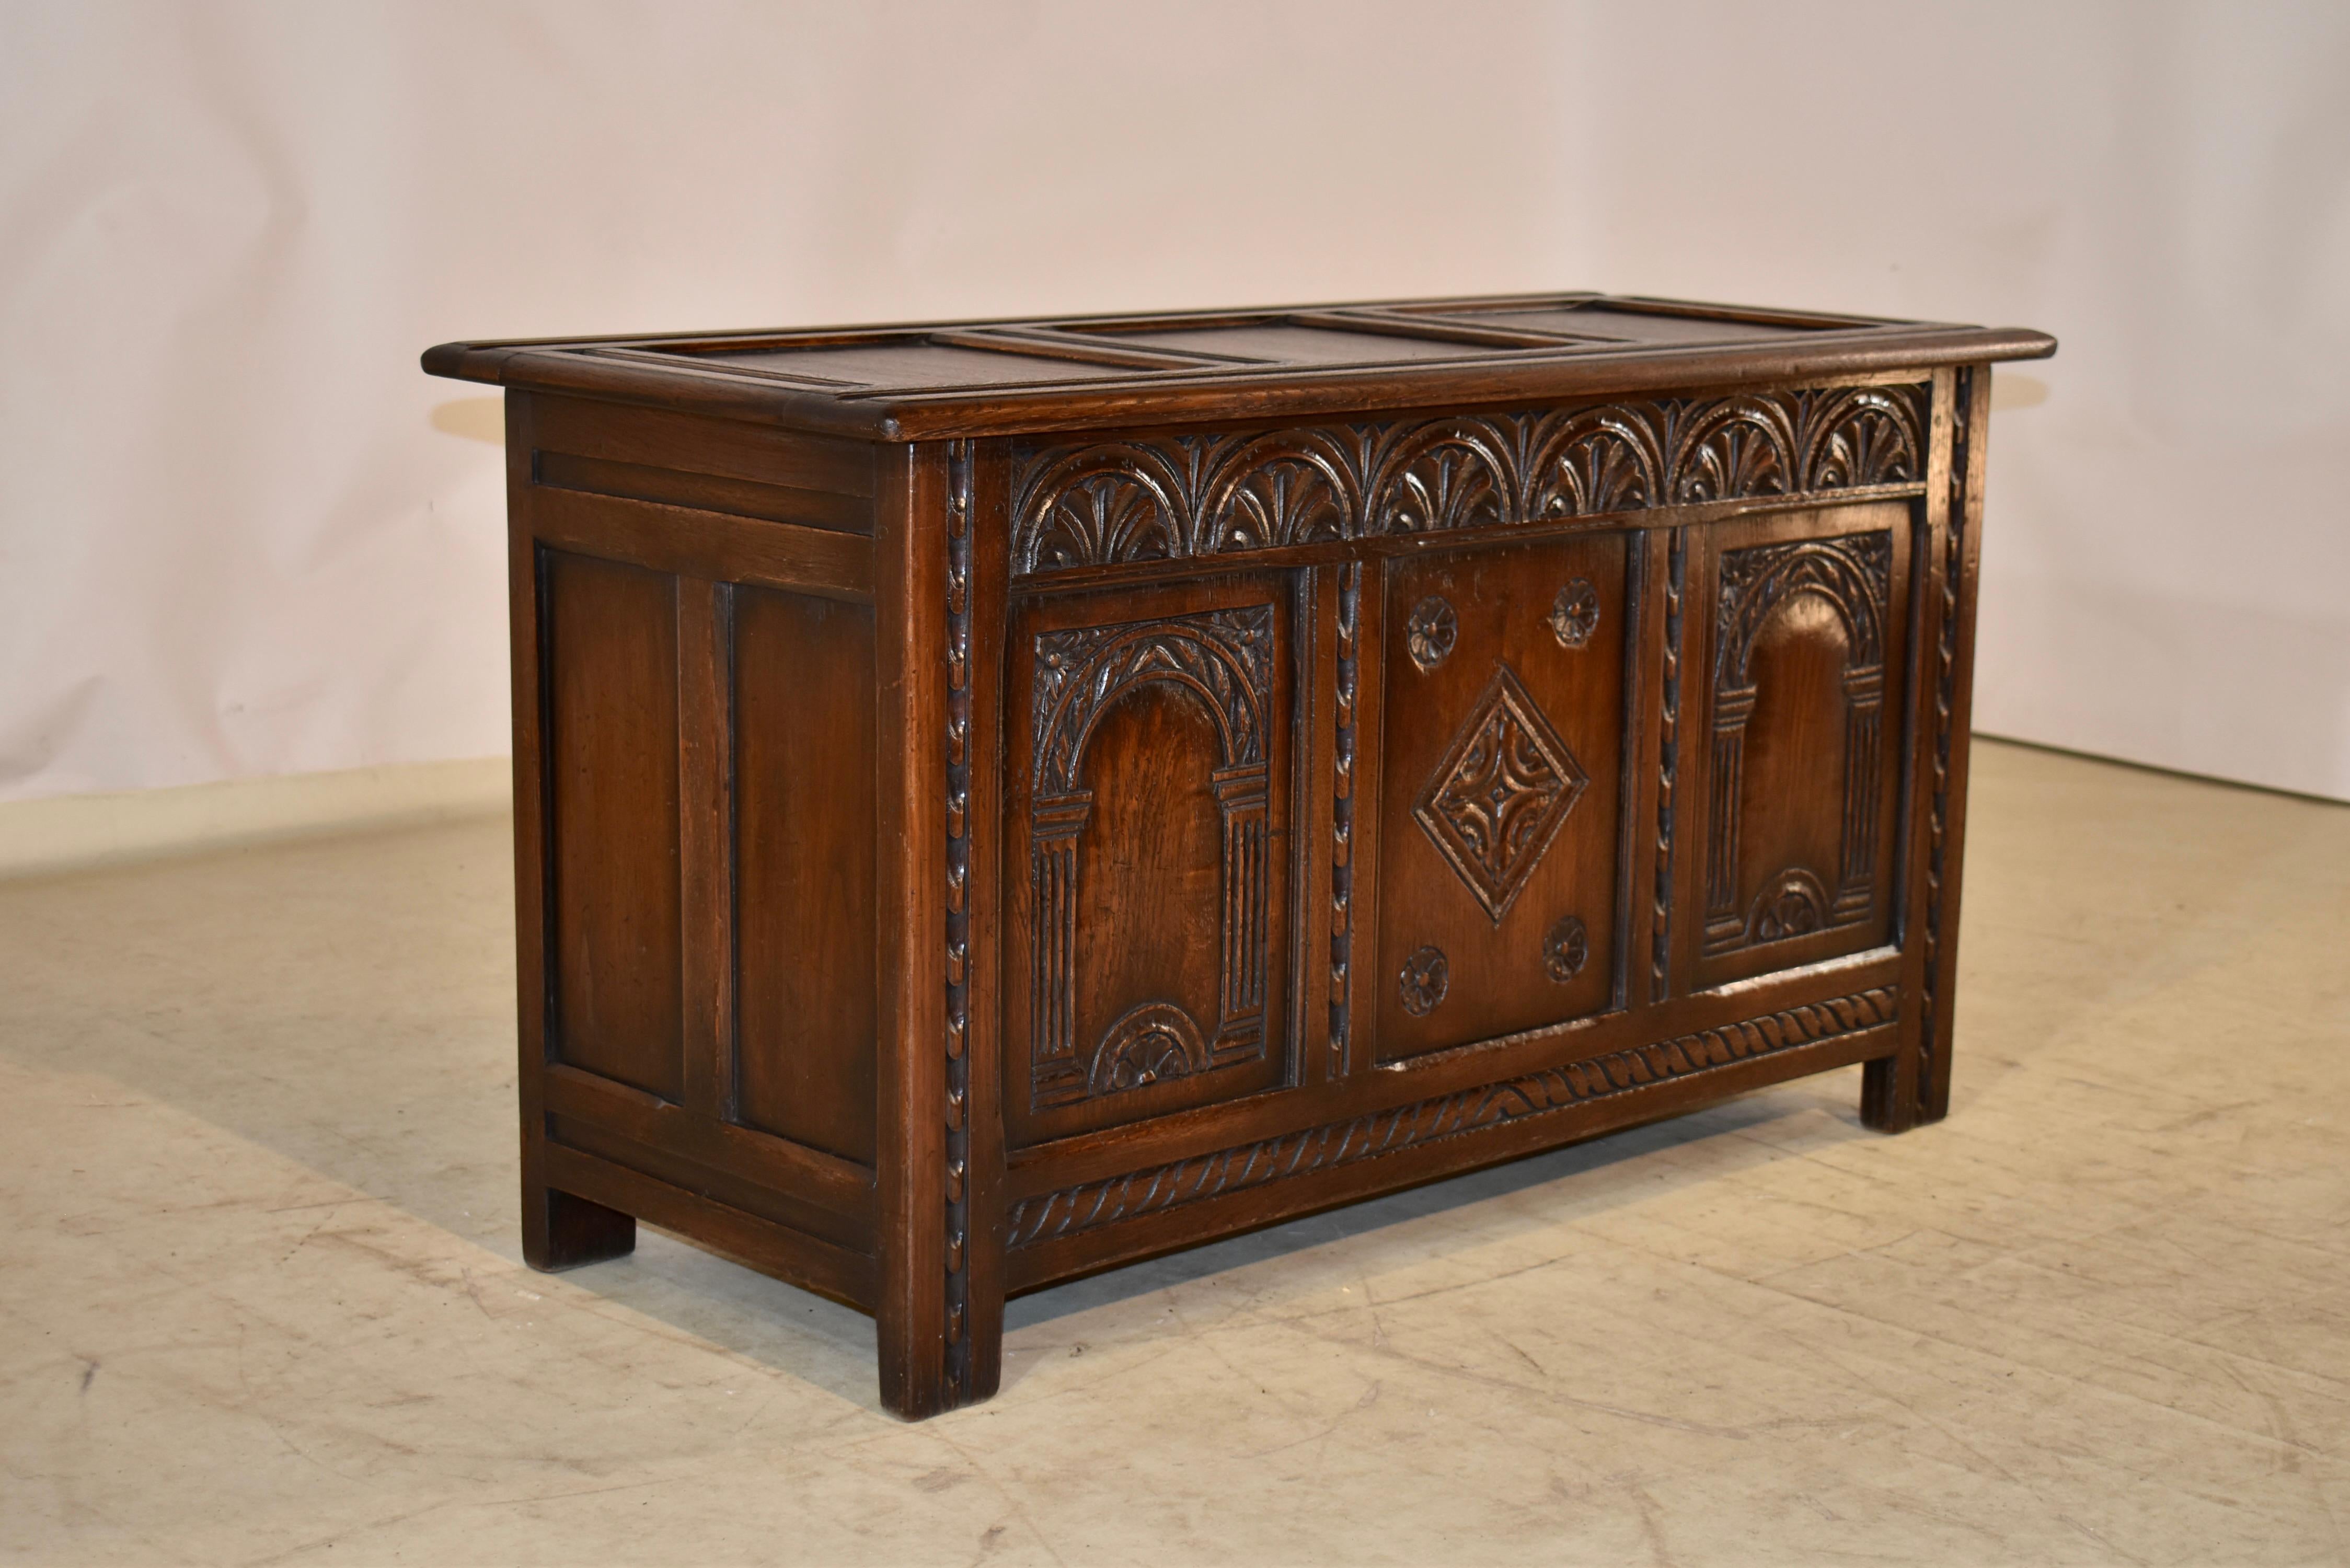 circa 1900-1910 English Edwardian blanket chest from England. The top is paneled, and follows down to paneled sides on all four sides for easy placement in any room. The back and sides feature simple paneling, and the front has a hand carved